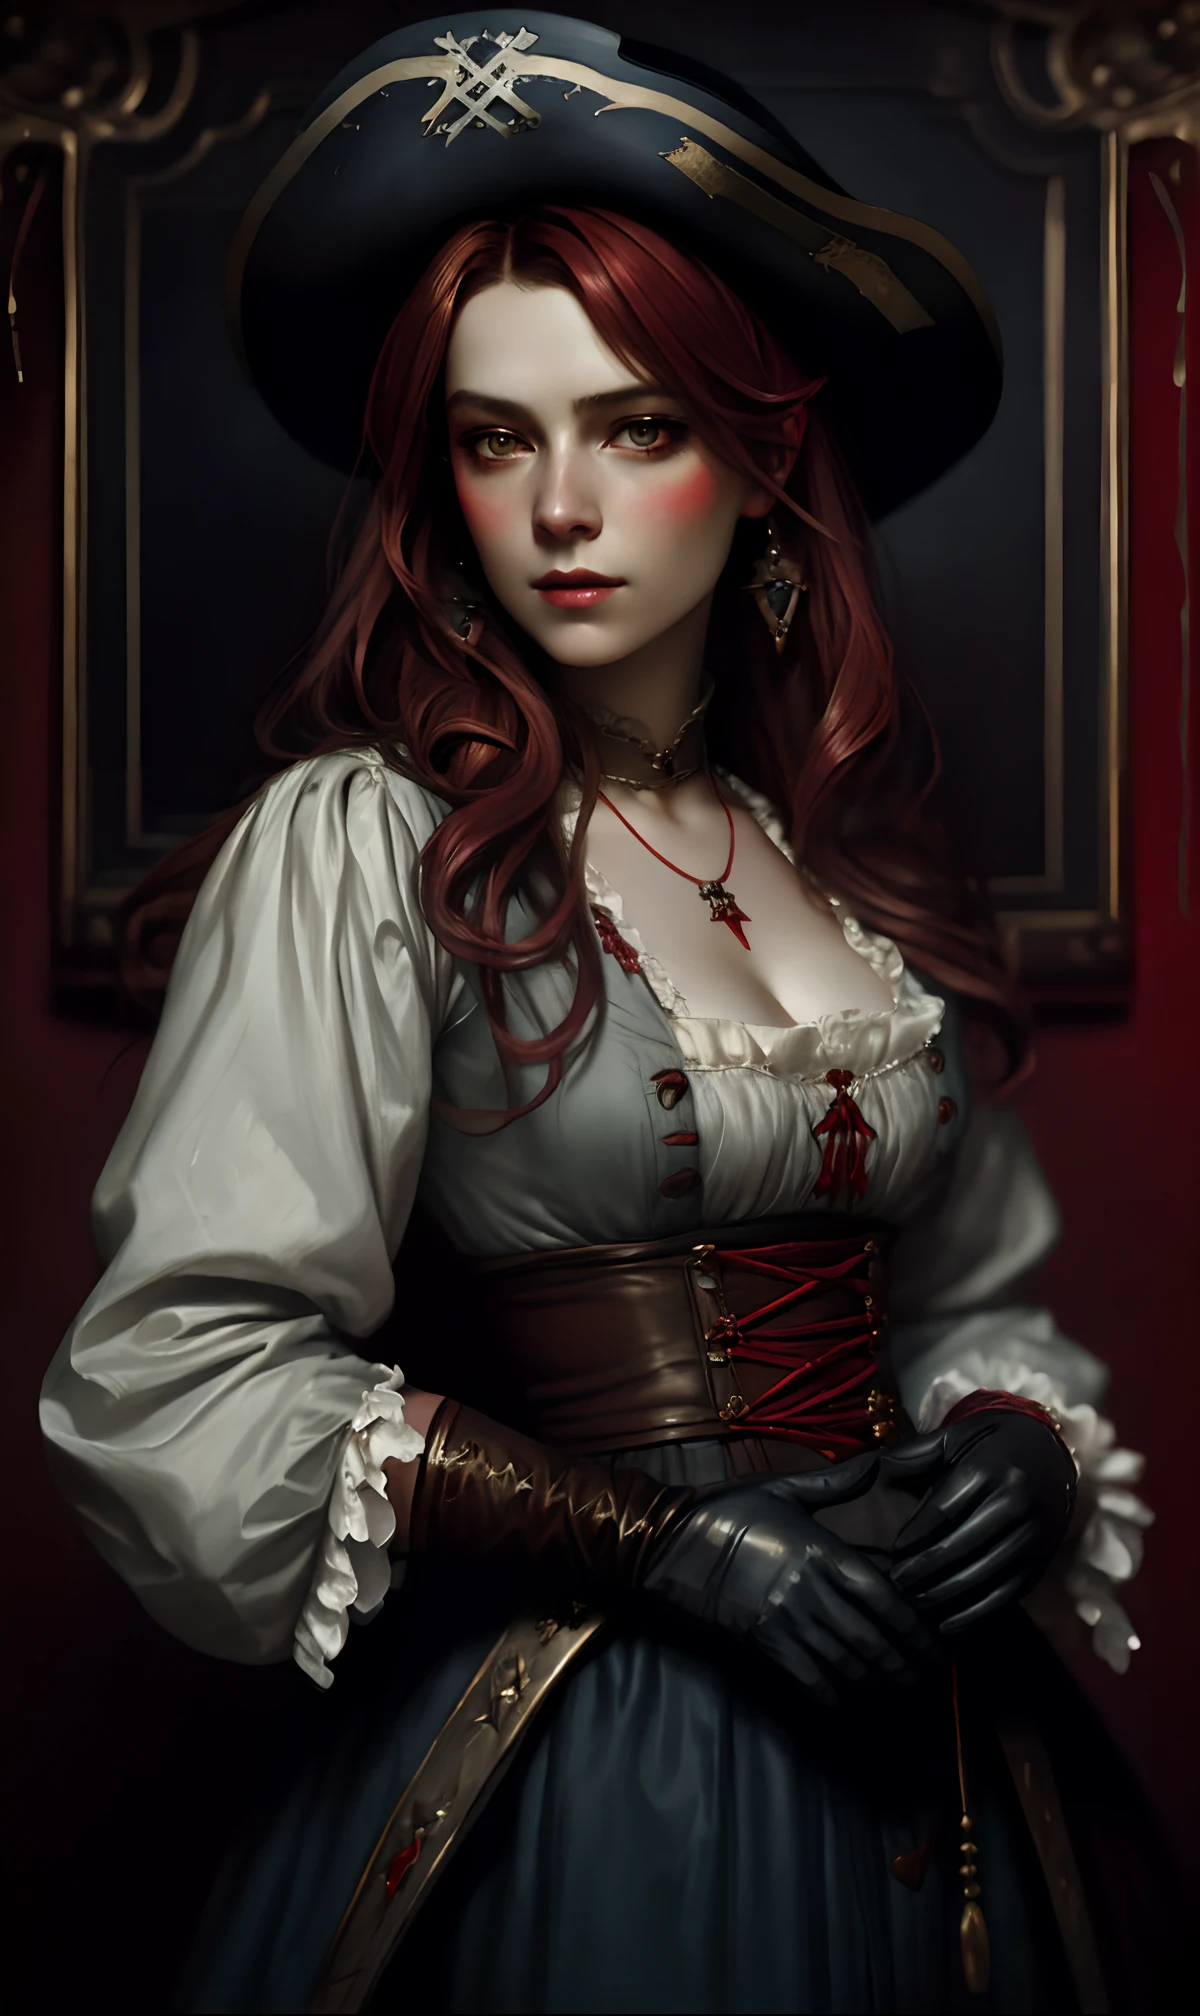 Solomon Joseph Solomon and Richard Schmid and Jeremy Lipking victorian genre painting full length portrait painting of a young beautiful woman wearing gloves traditional german french actress model pirate wench in fantasy costume, red background,